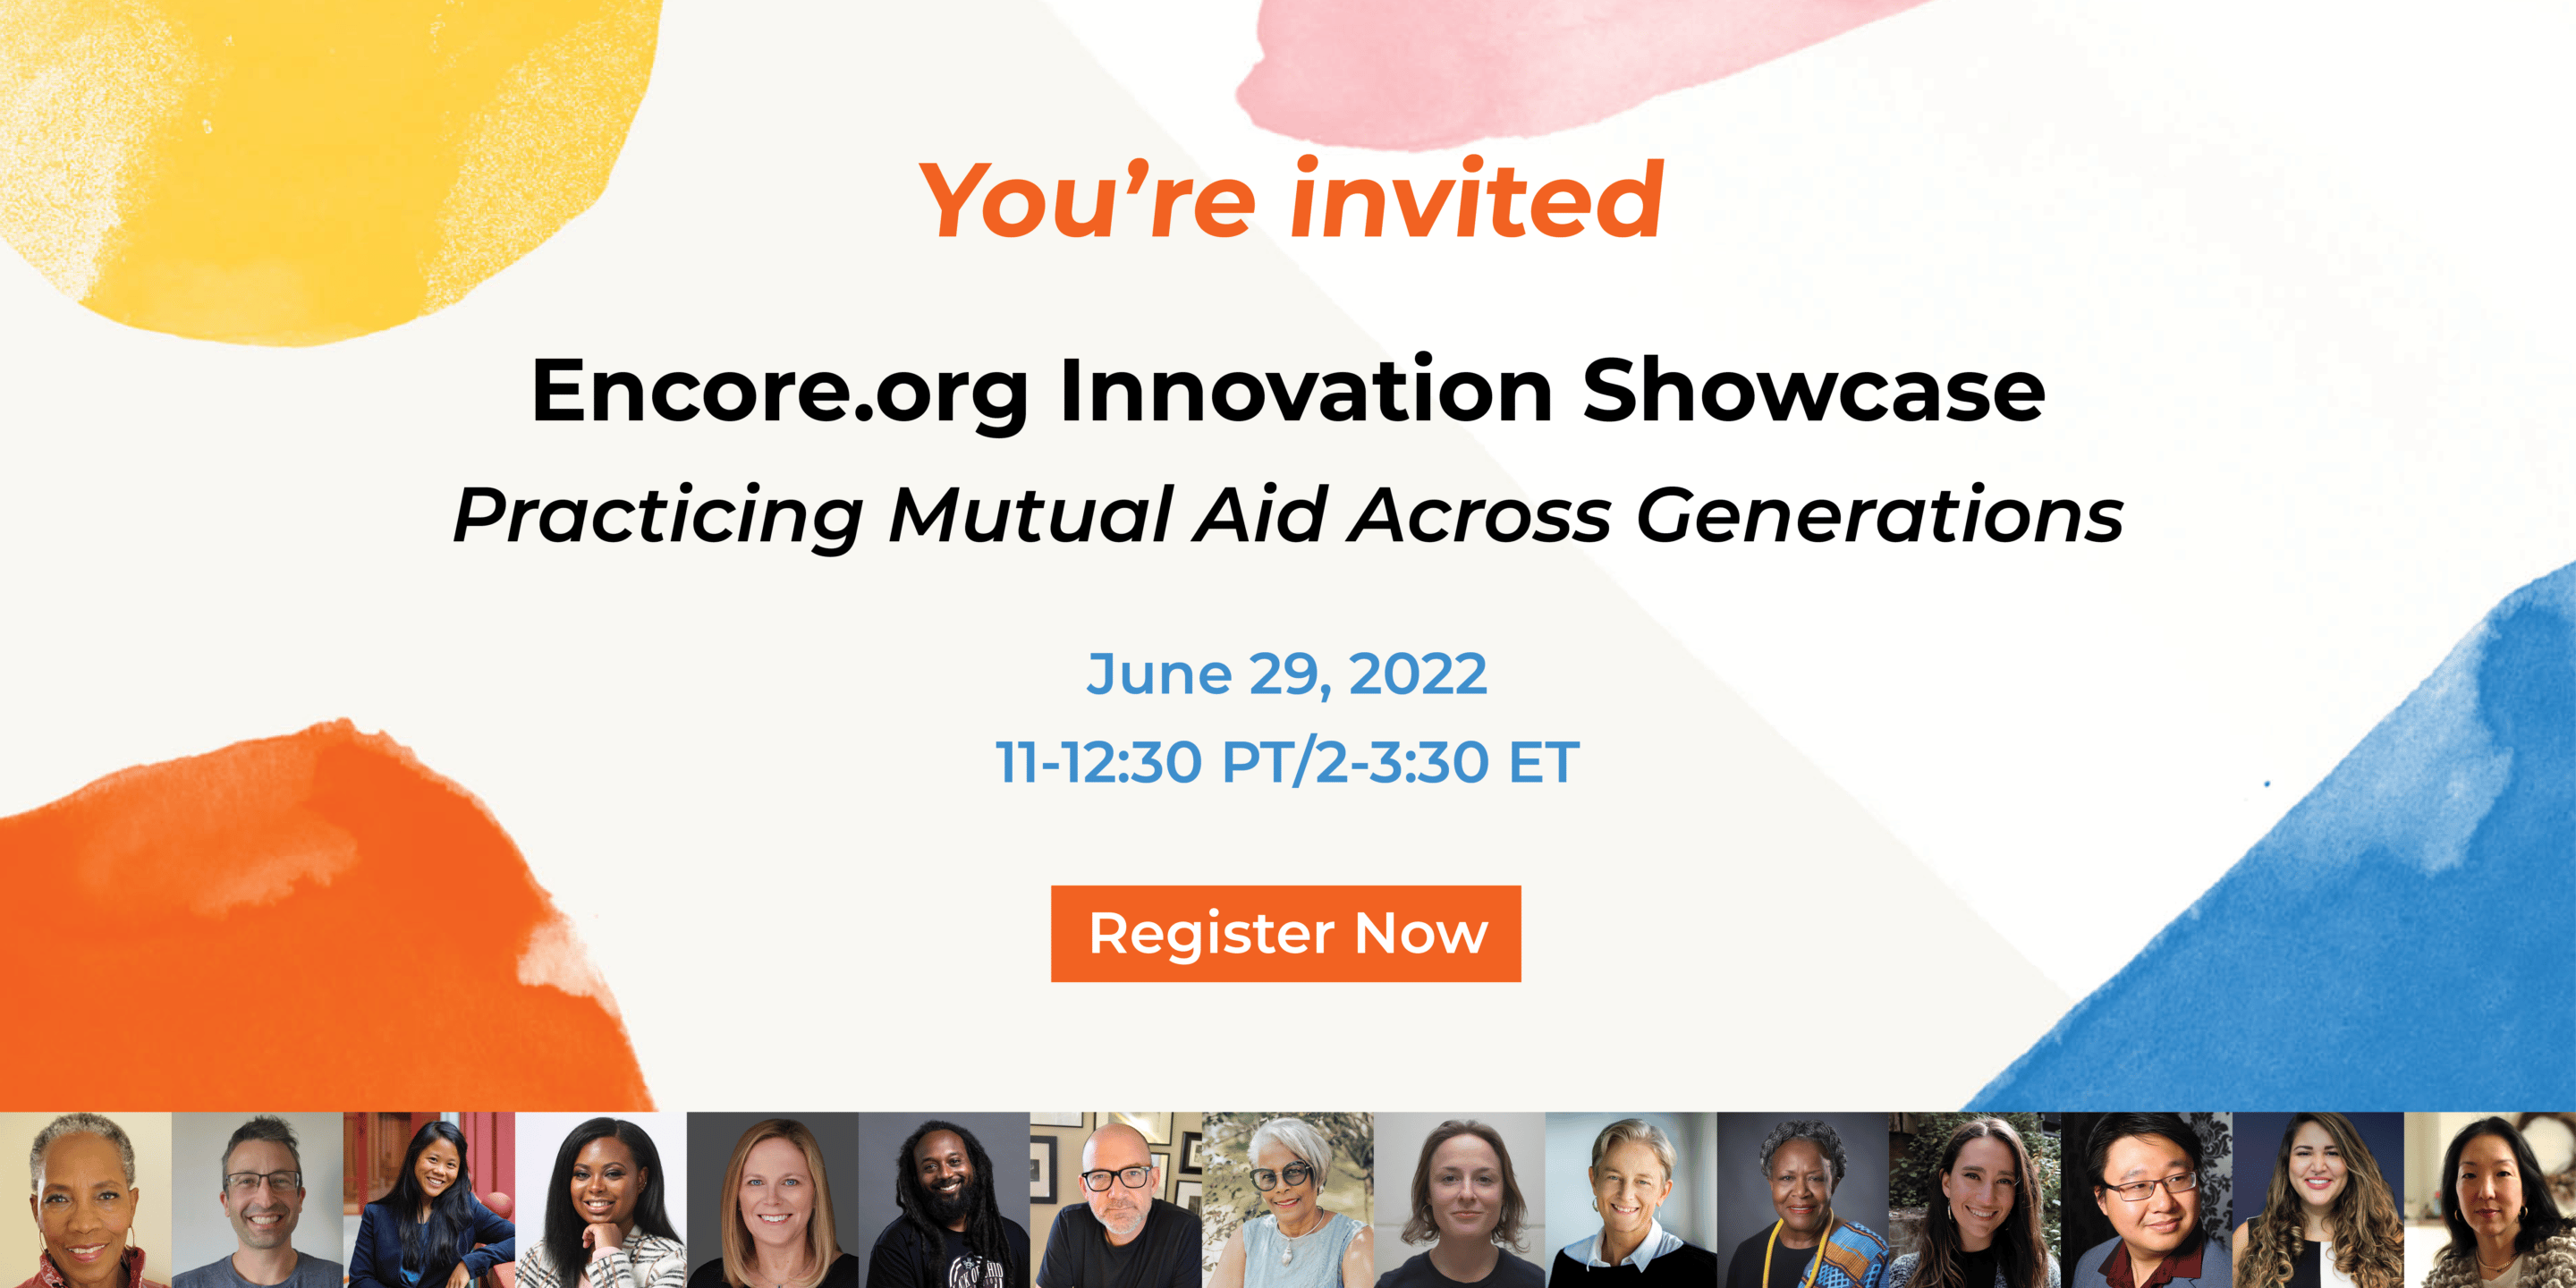 Colorful image featuring watercolor splashes and the prominent text reading: "You're Invited: Encore.org Innovation showcase: Practicing Mutual Aid Across Generations. June 29, 2022. 11-12:30 PT/2-2:30 ET. Register now." The image links to the registration page for the event.